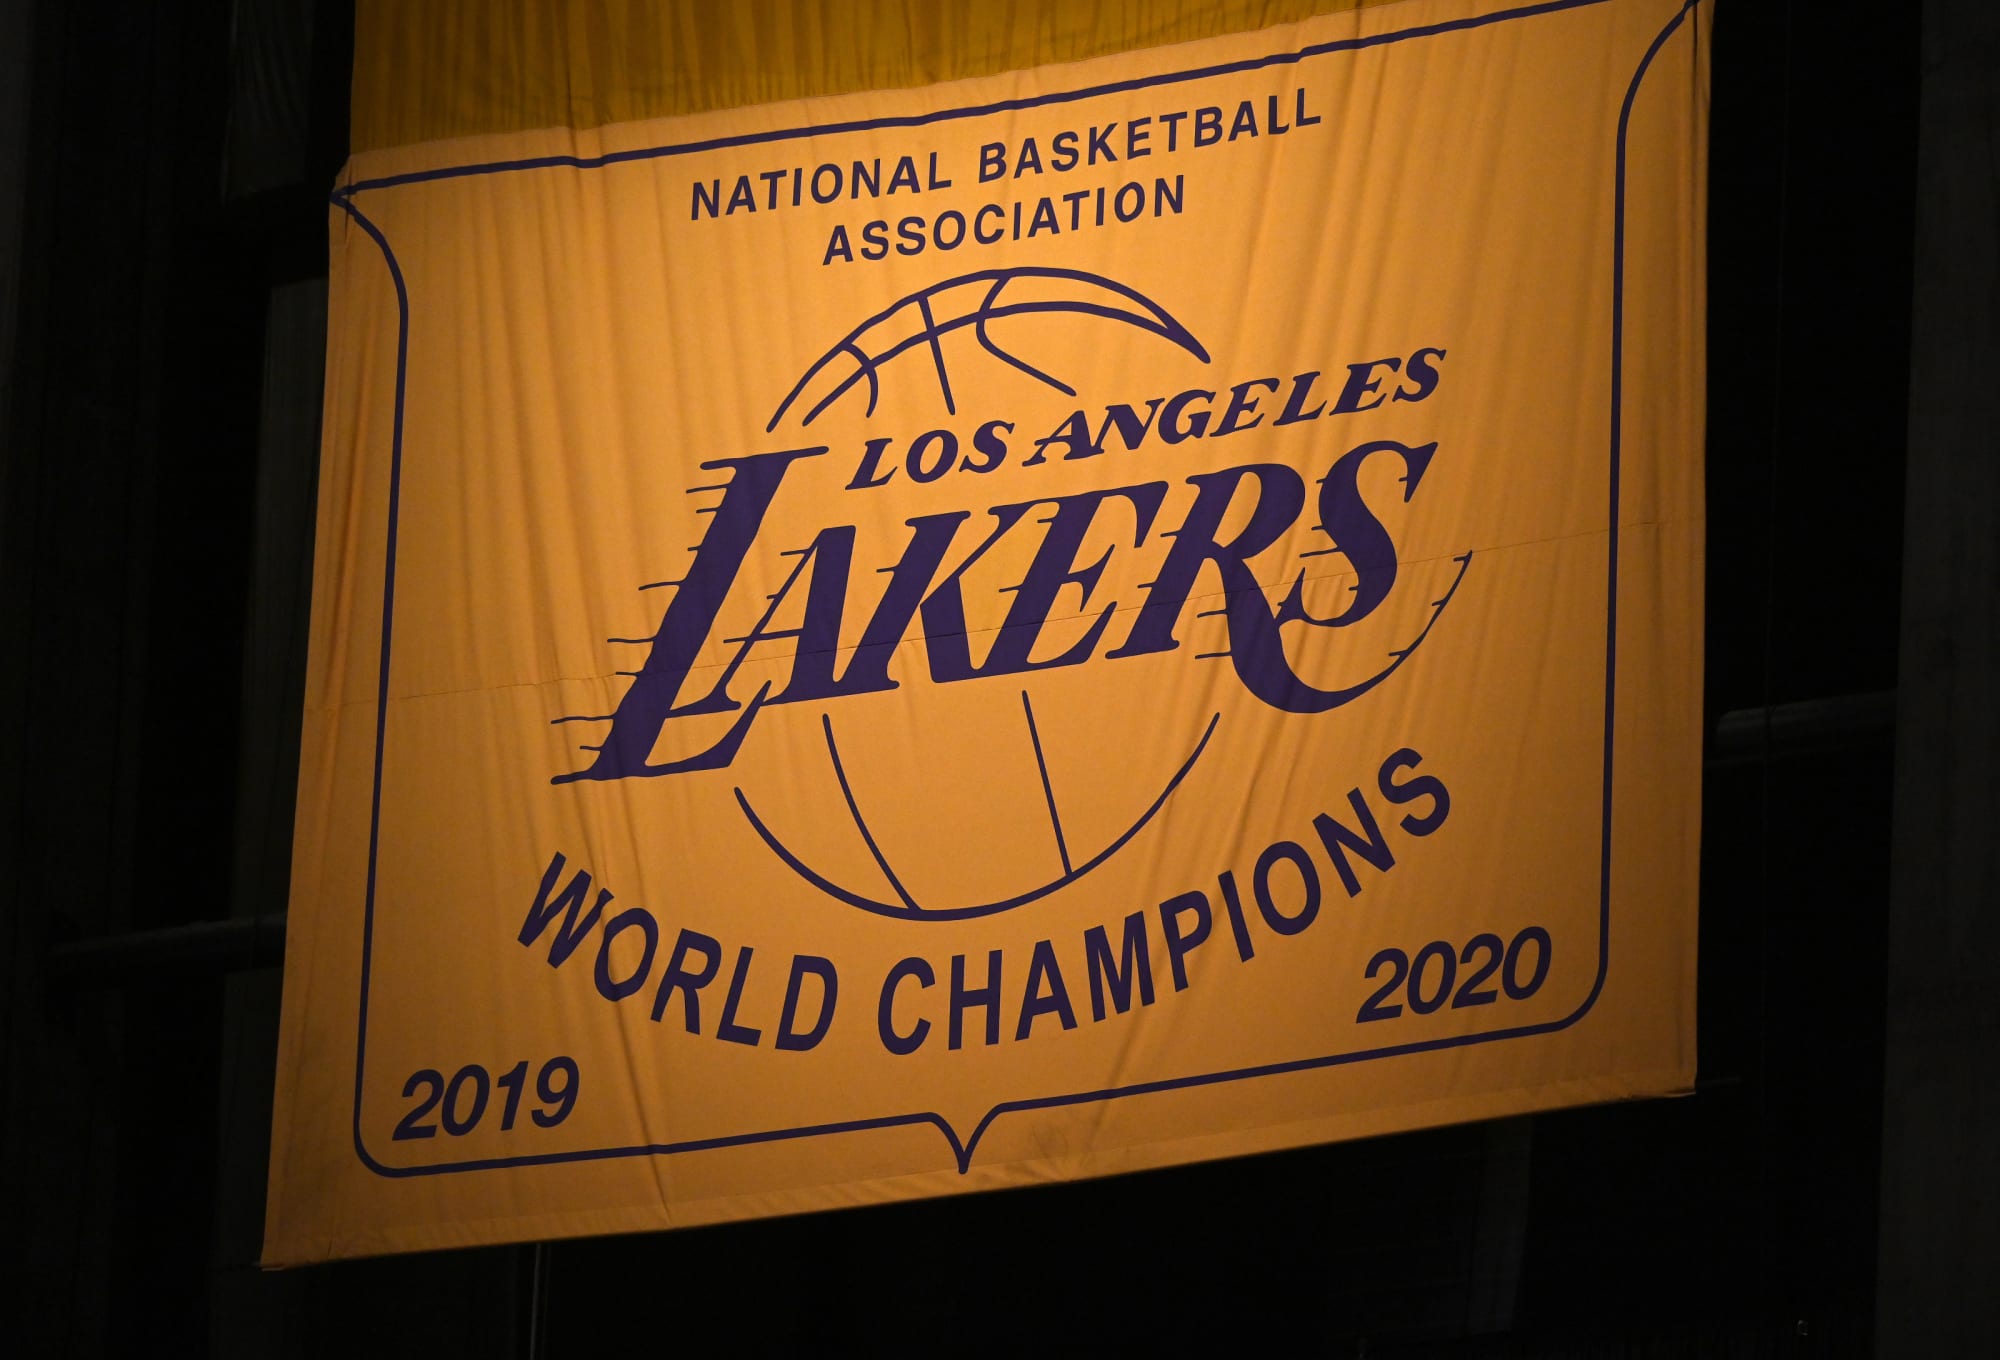 Los Angeles Lakers: The Phoenix Rising with 17 Championships and